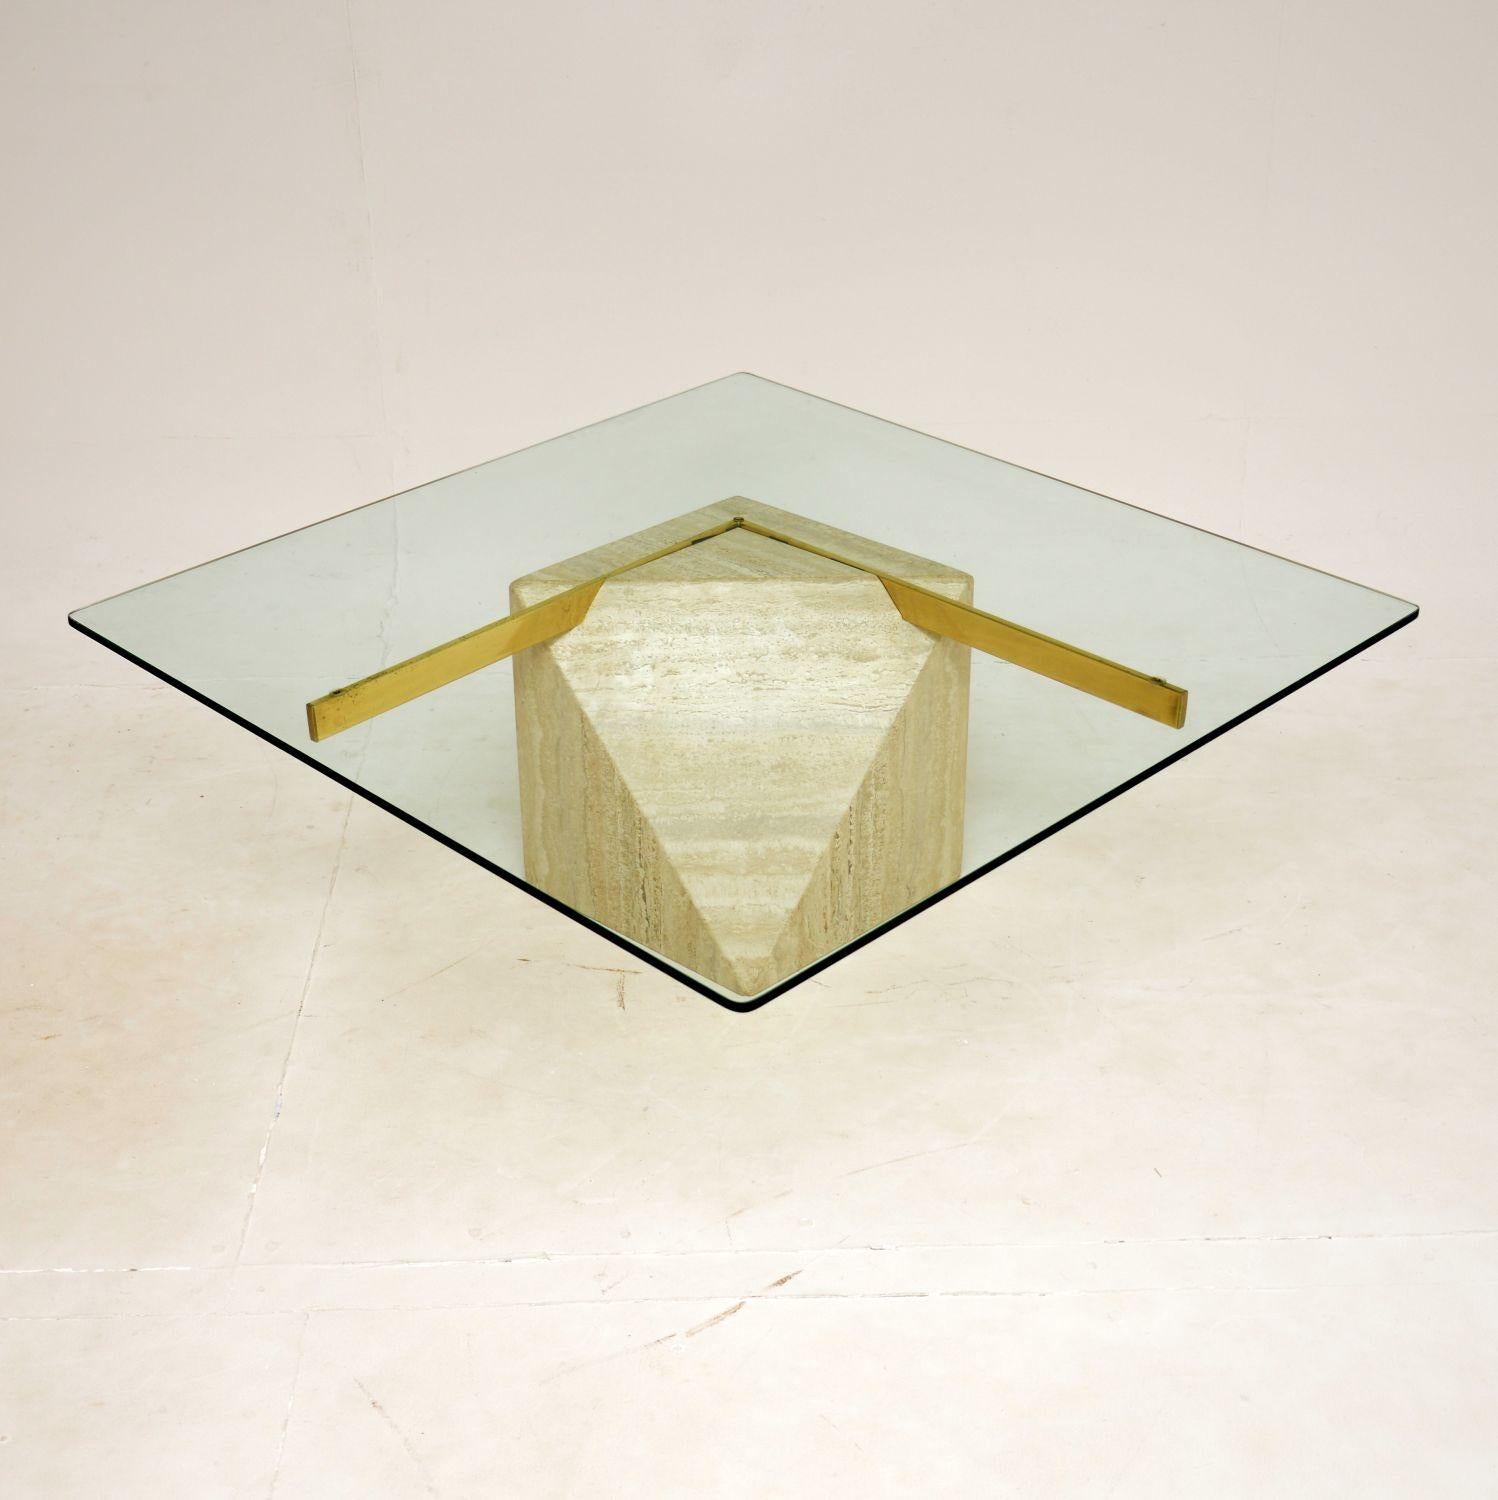 A wonderful vintage Italian coffee table by Artedi, dating from the 1970’s.

It has a beautifully sculpted travertine base, with a V shaped brass support and thick, toughened glass top.

This is in superb condition, with no damage and only some